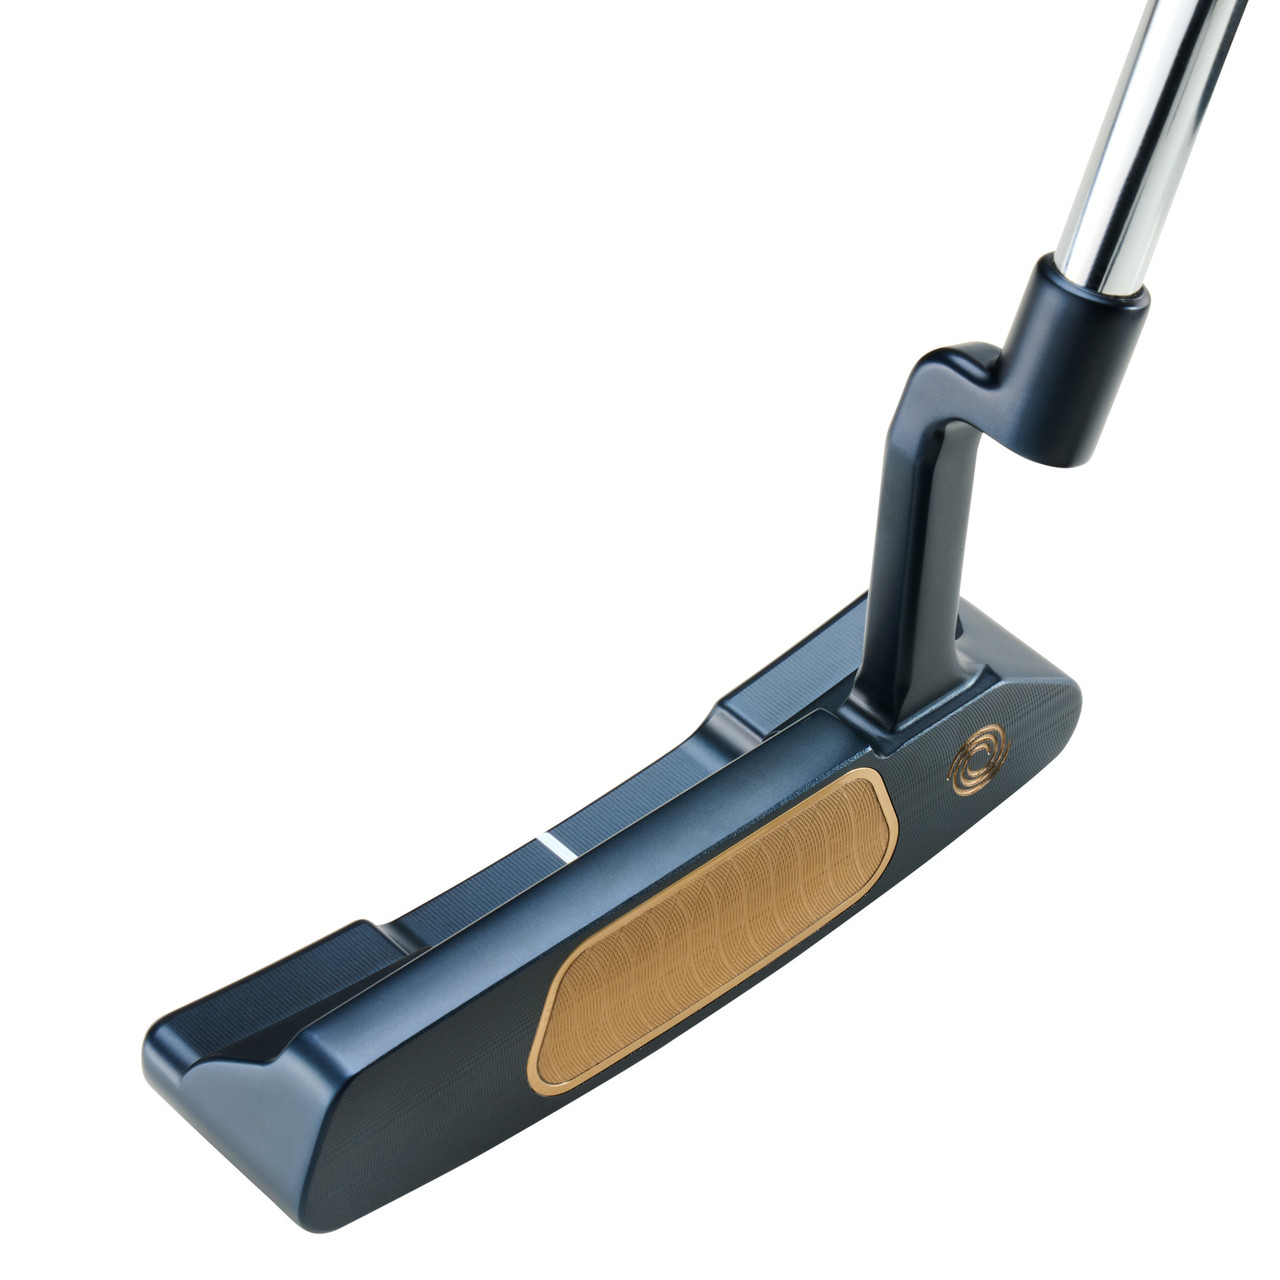 Odyssey Ai-One Milled Two T Putter